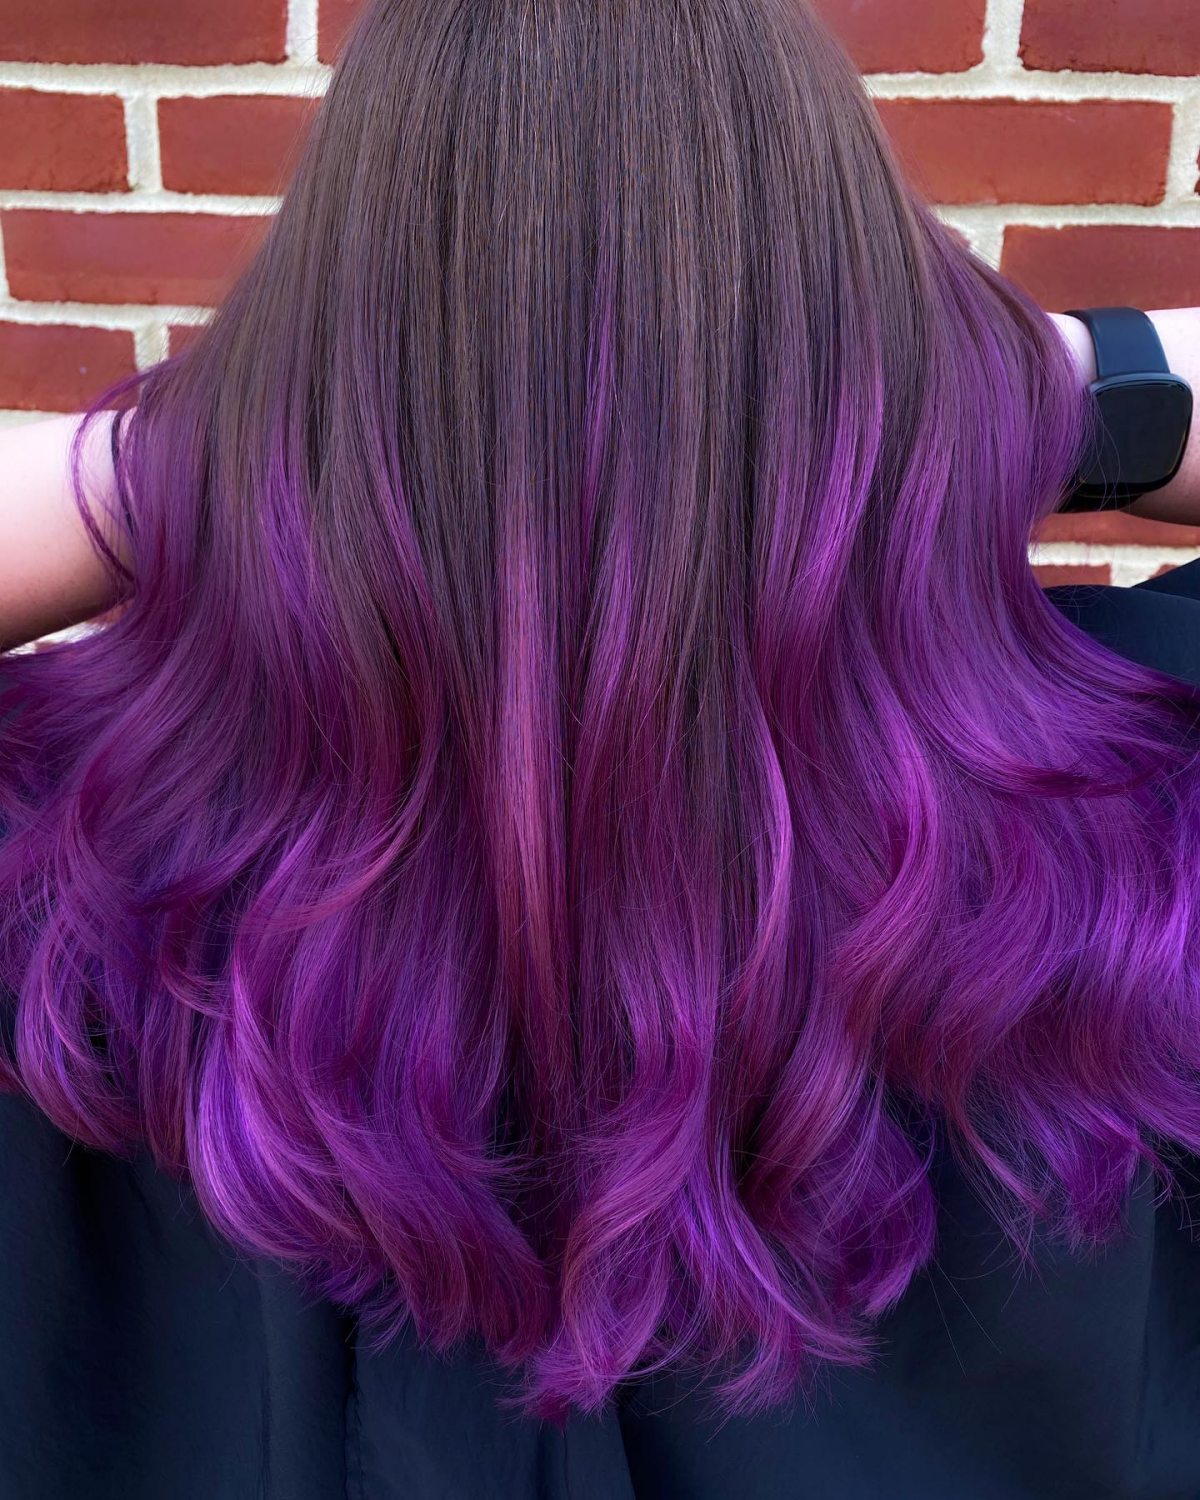 13 Beautiful Purple Ombre Hair Ideas To Refresh Your Style